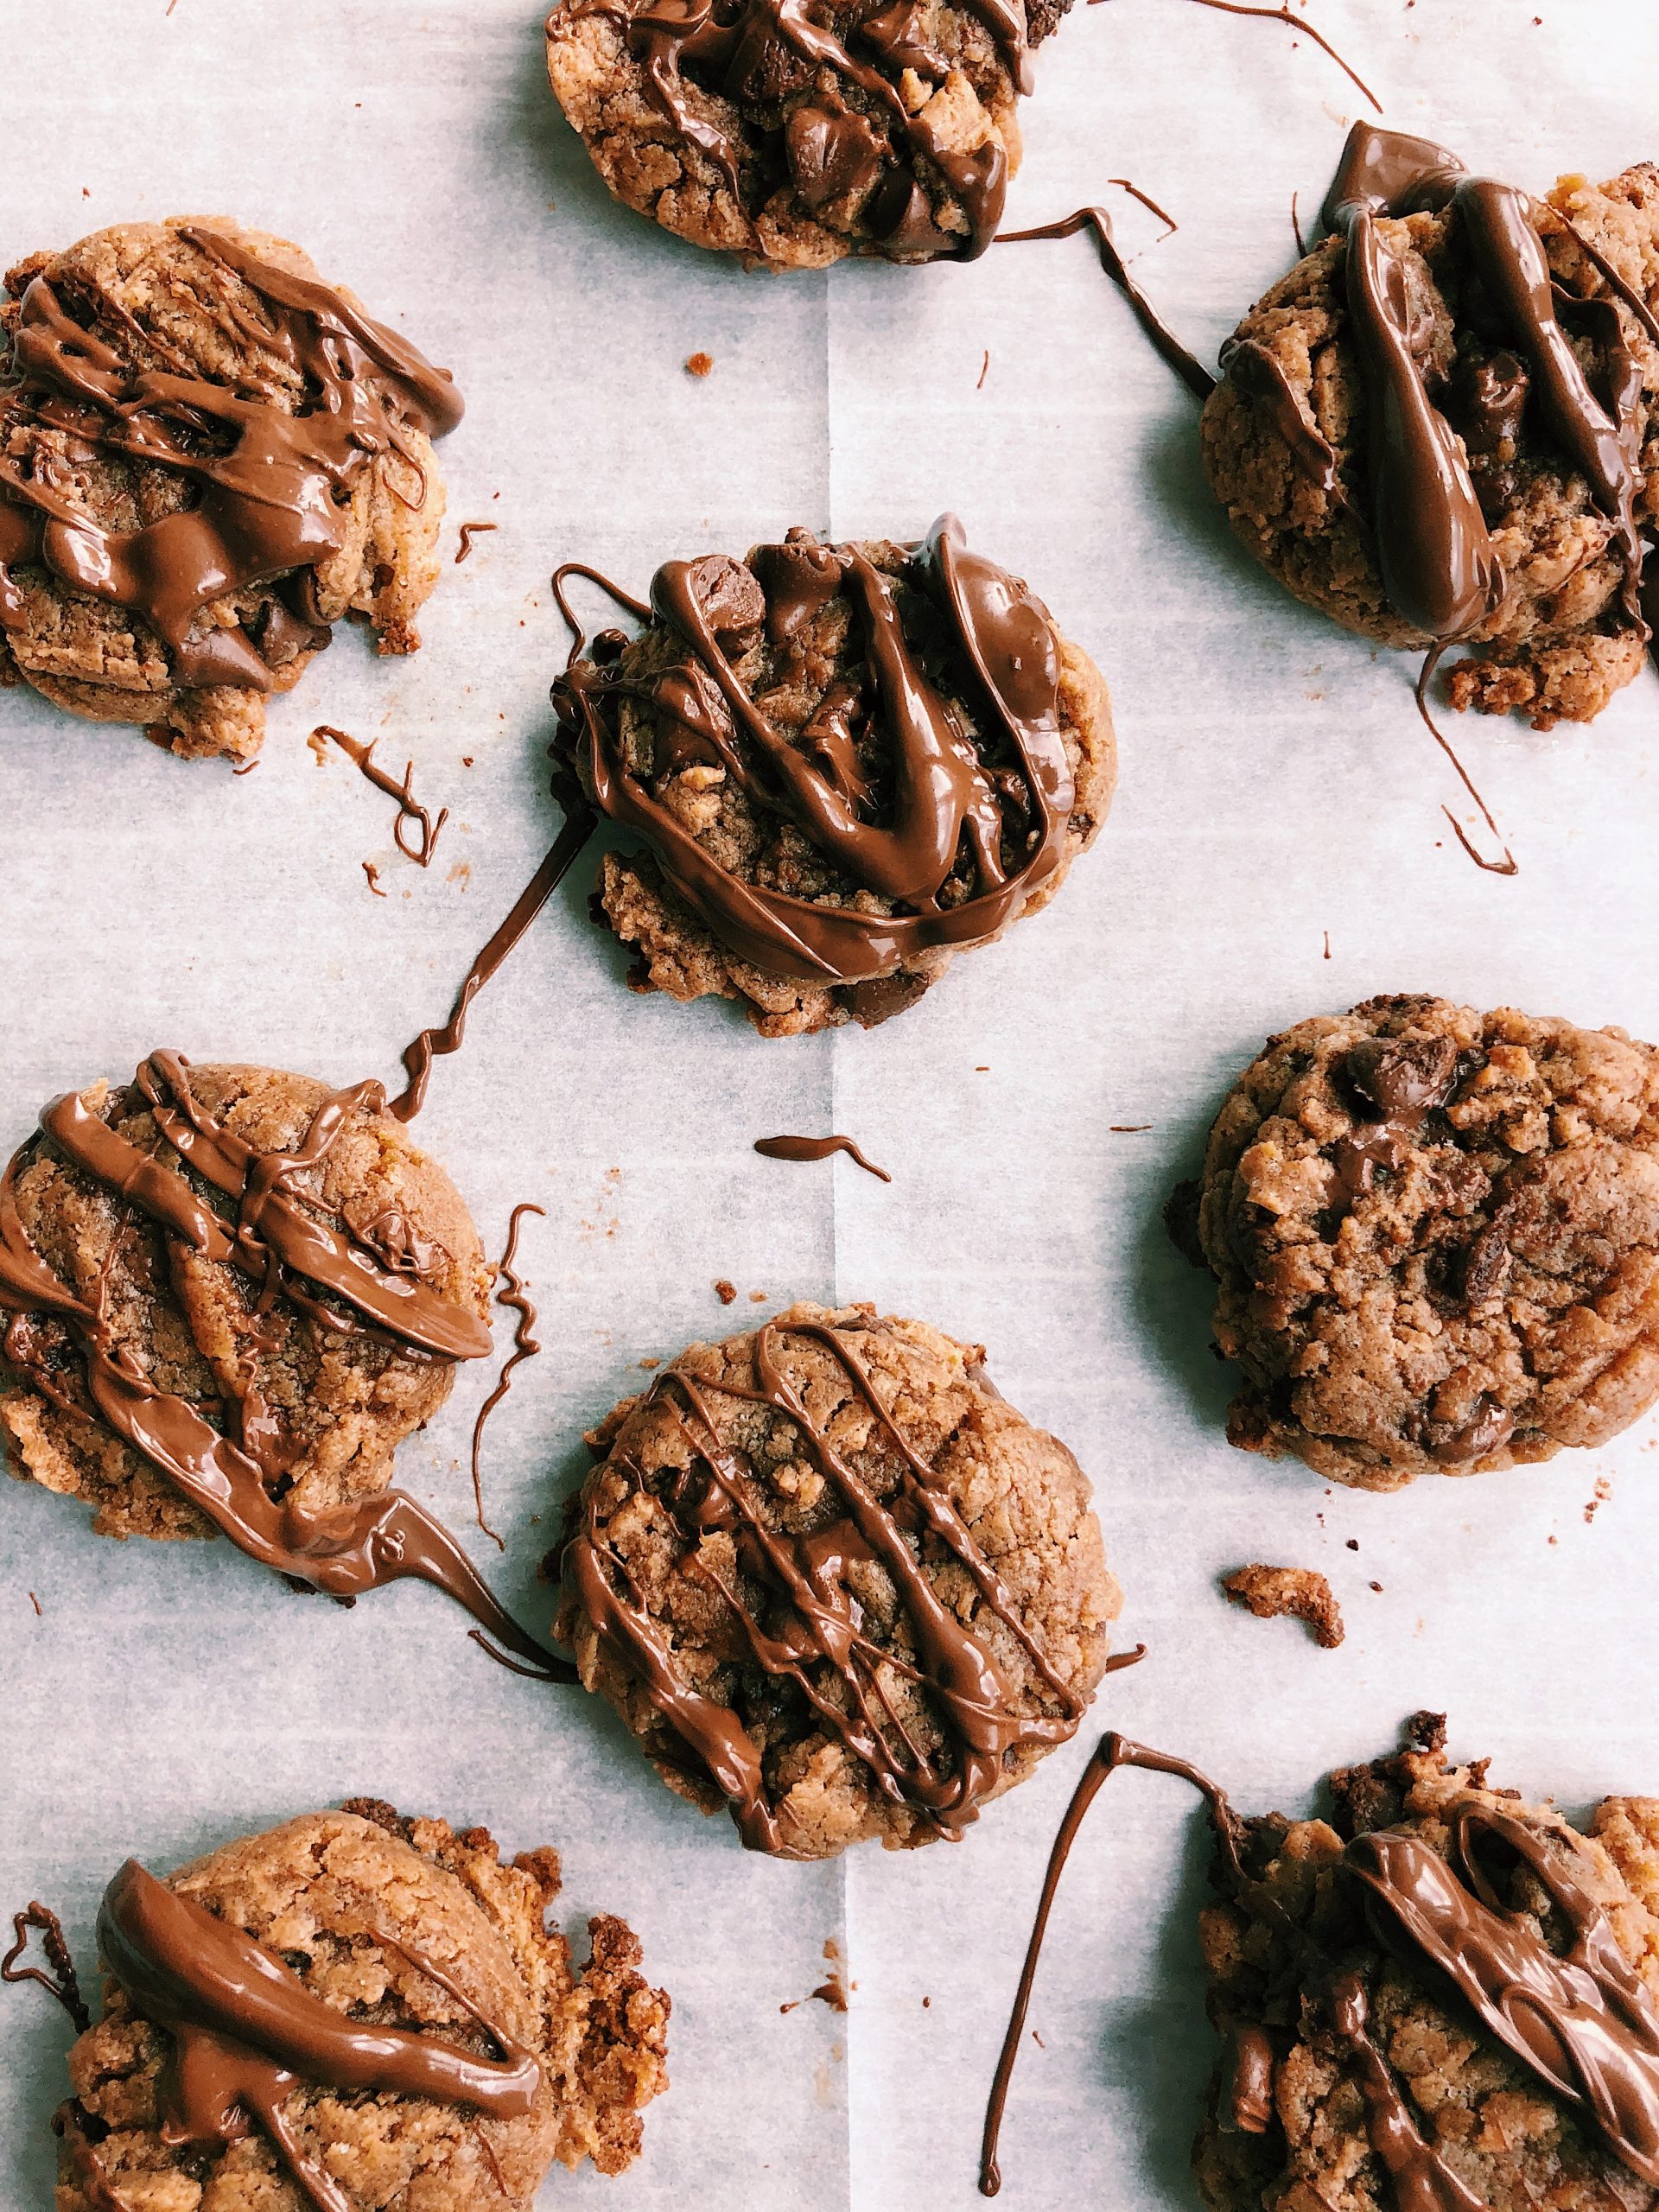 small almond butter blossom cookies drizzled in chocolate on parchment paper.